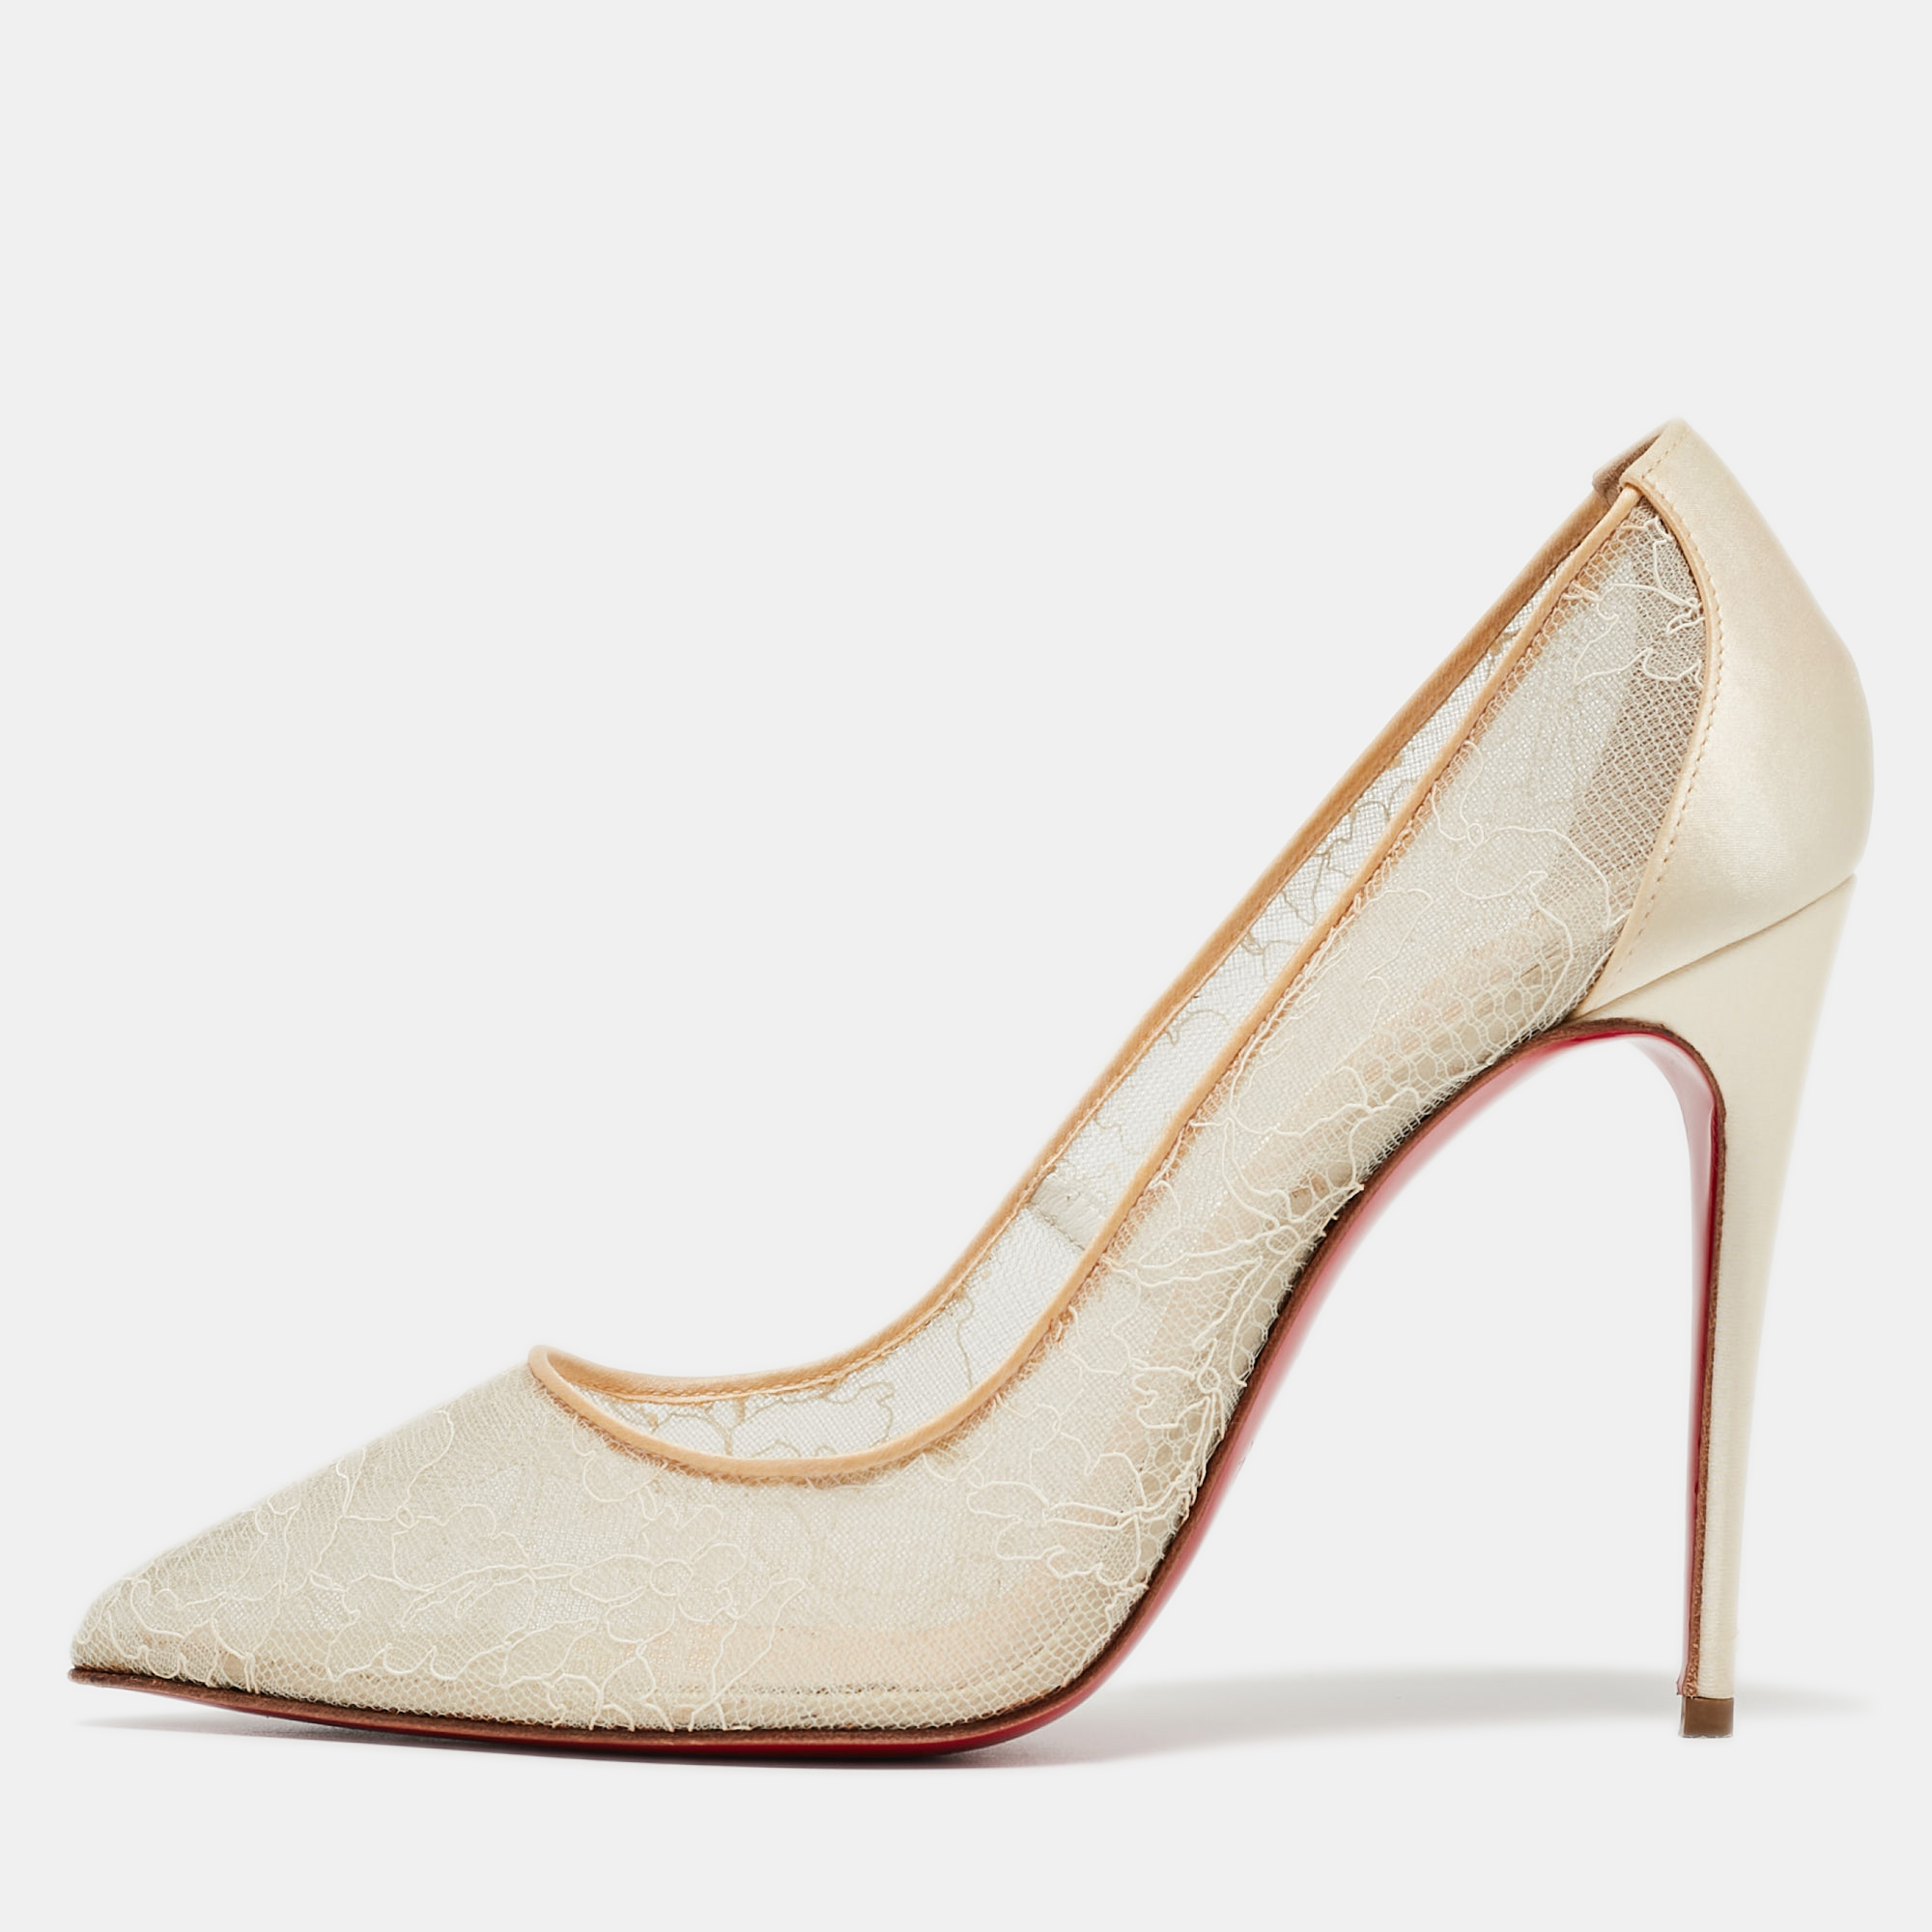 Christian Louboutin Off White Satin And Lace Follies Pumps Size 38.5